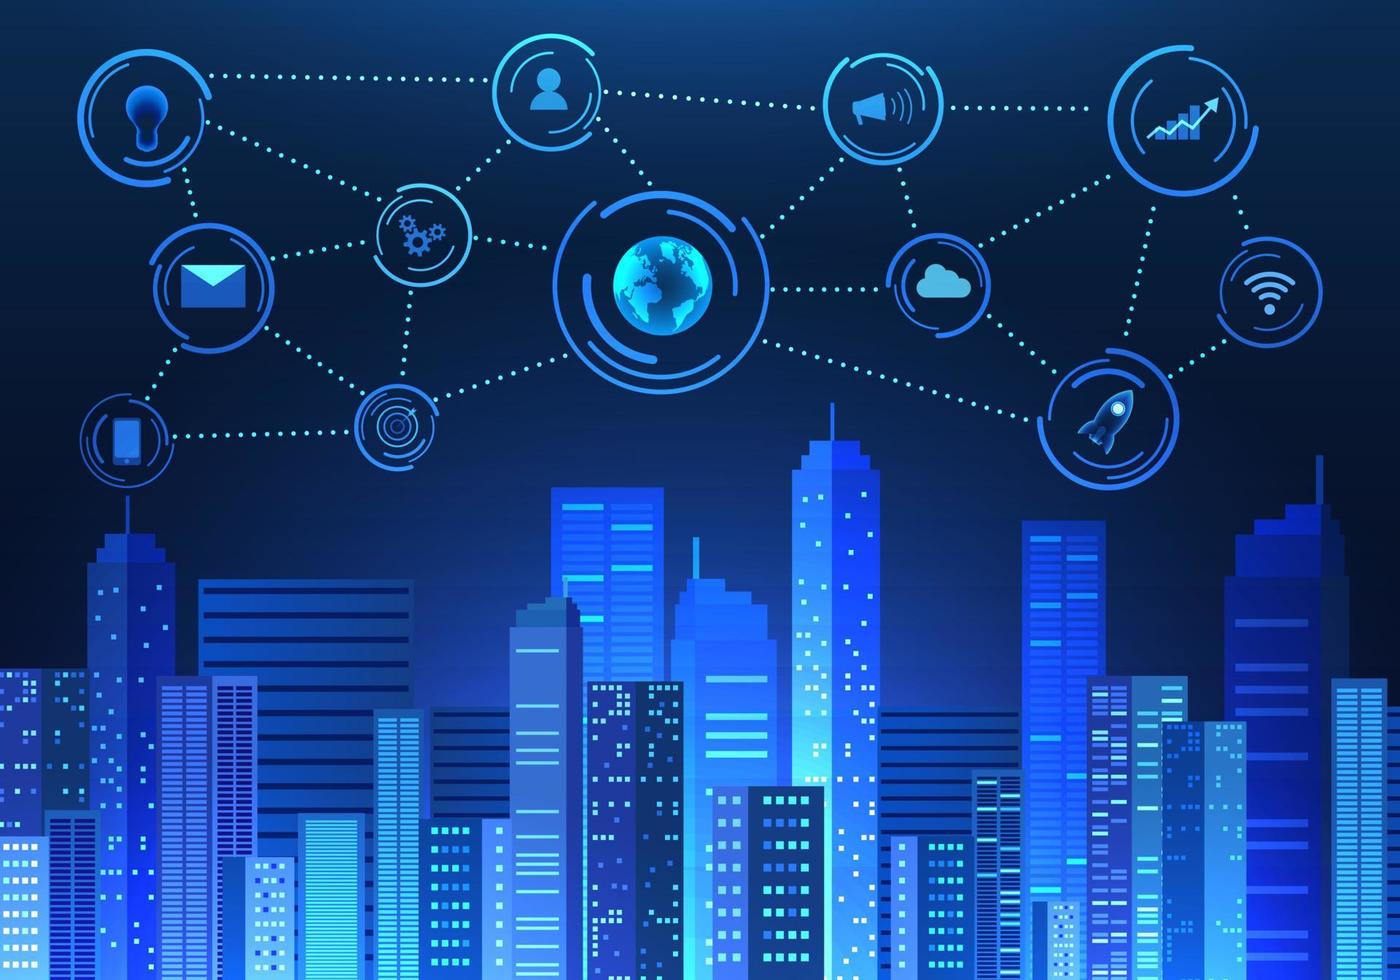 Large smart city using internet technology. The artificial intelligence system that helps in various matters increases convenience and makes business in the city grow more. vector